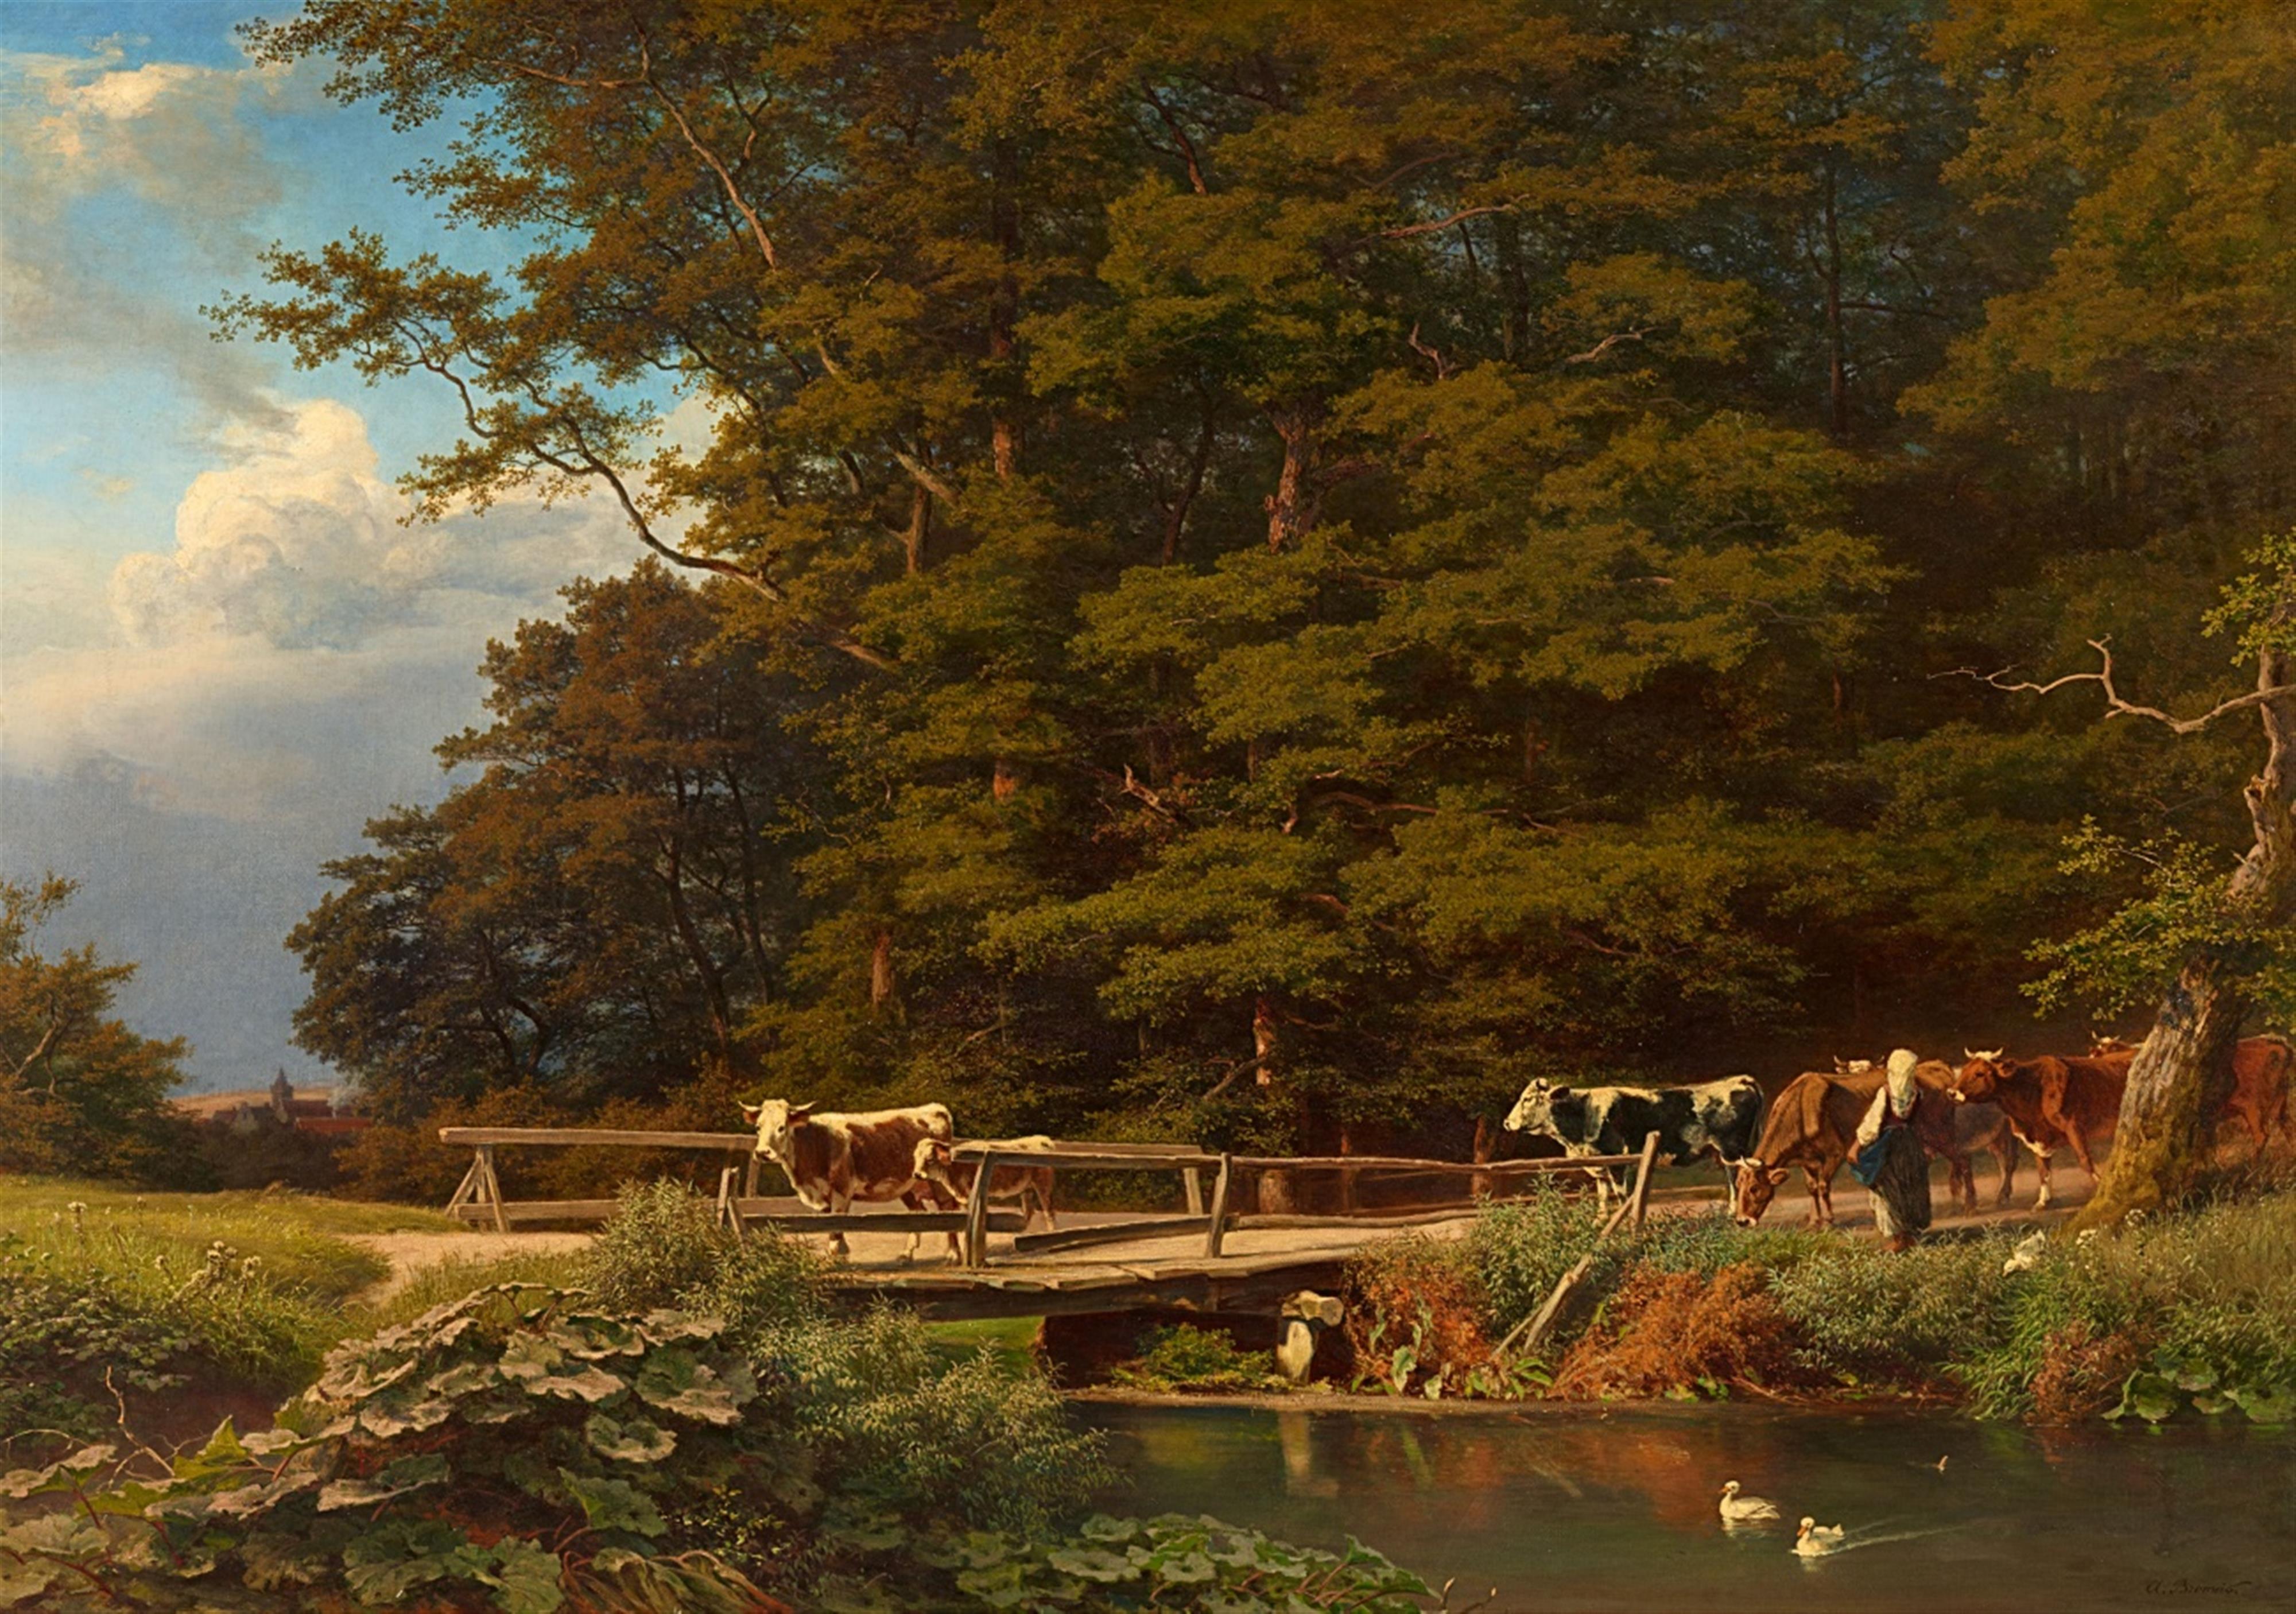 August Bromeis - Wooded Landscape with Cattle by a Bridge